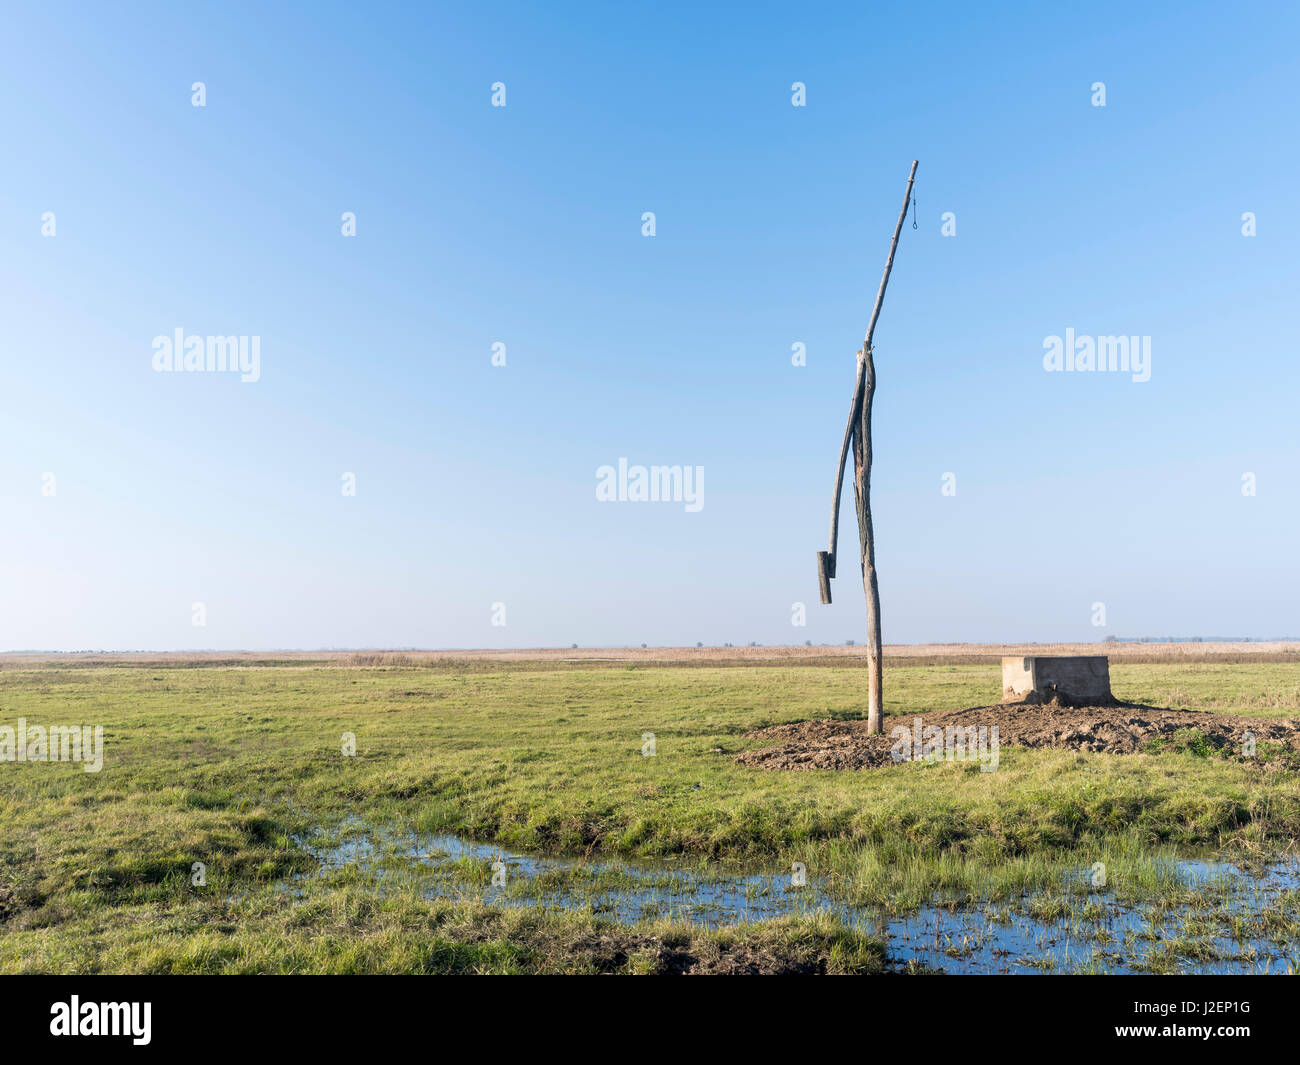 Traditional water well (well sweep or shadoof) in the Hungarian lowland plains also called Puszta in the Hotobagy National Park, which is listed as UNESCO world heritage Hungary, November (Large format sizes available) Stock Photo